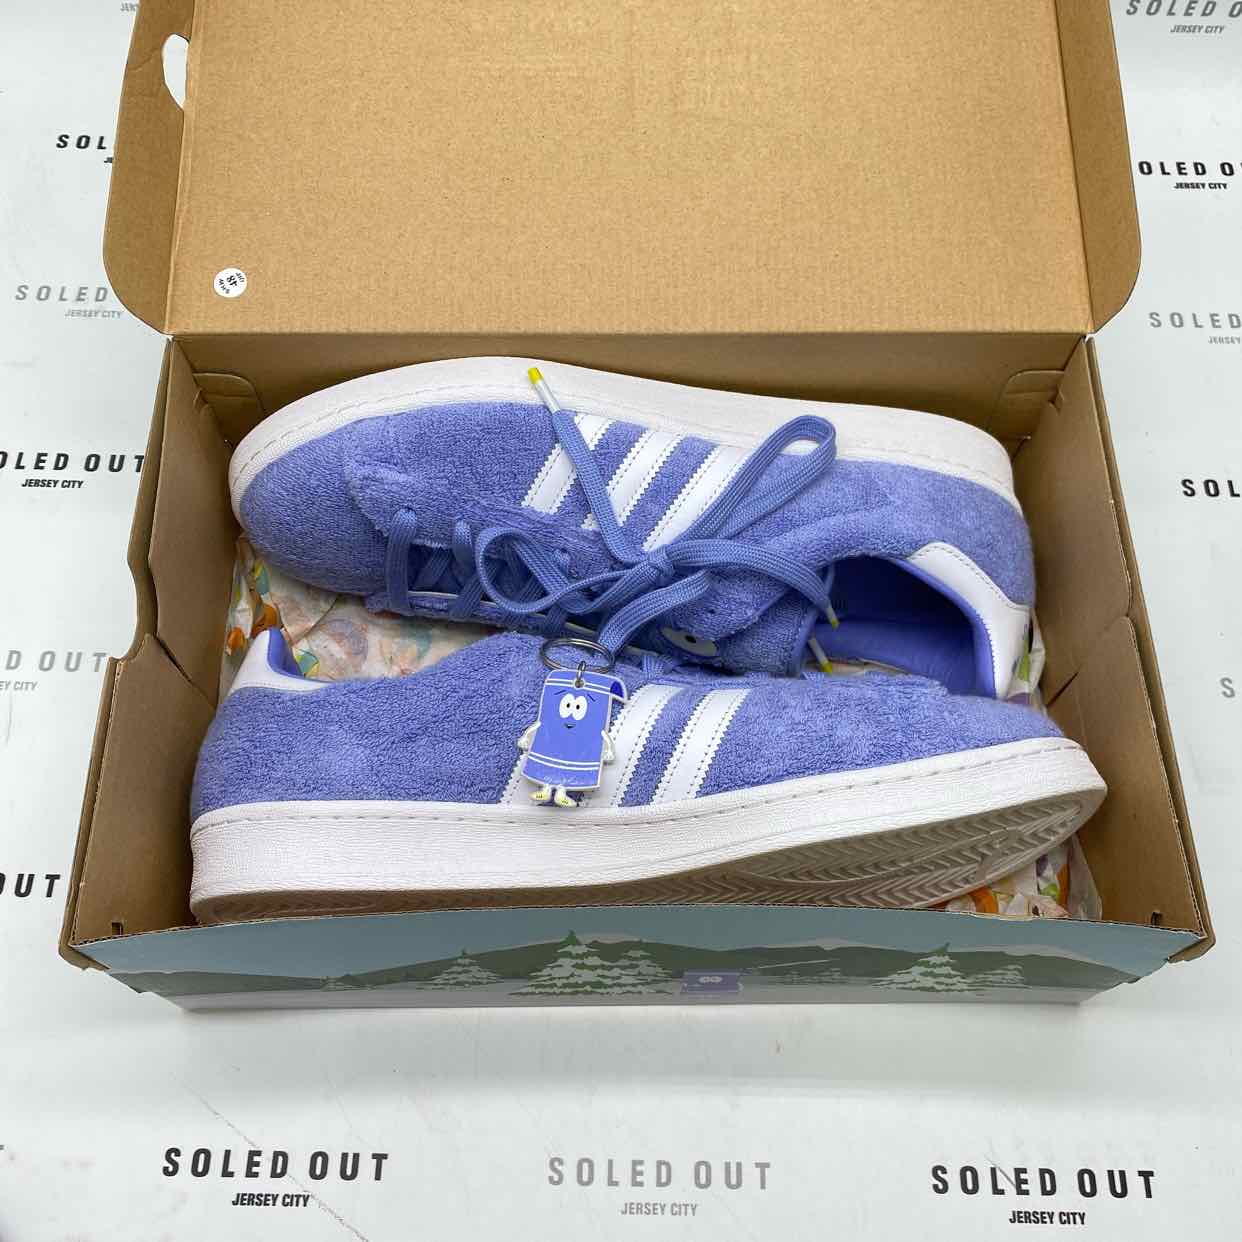 Adidas Campus 80s SP "Towelie" 2021 Used Size 13